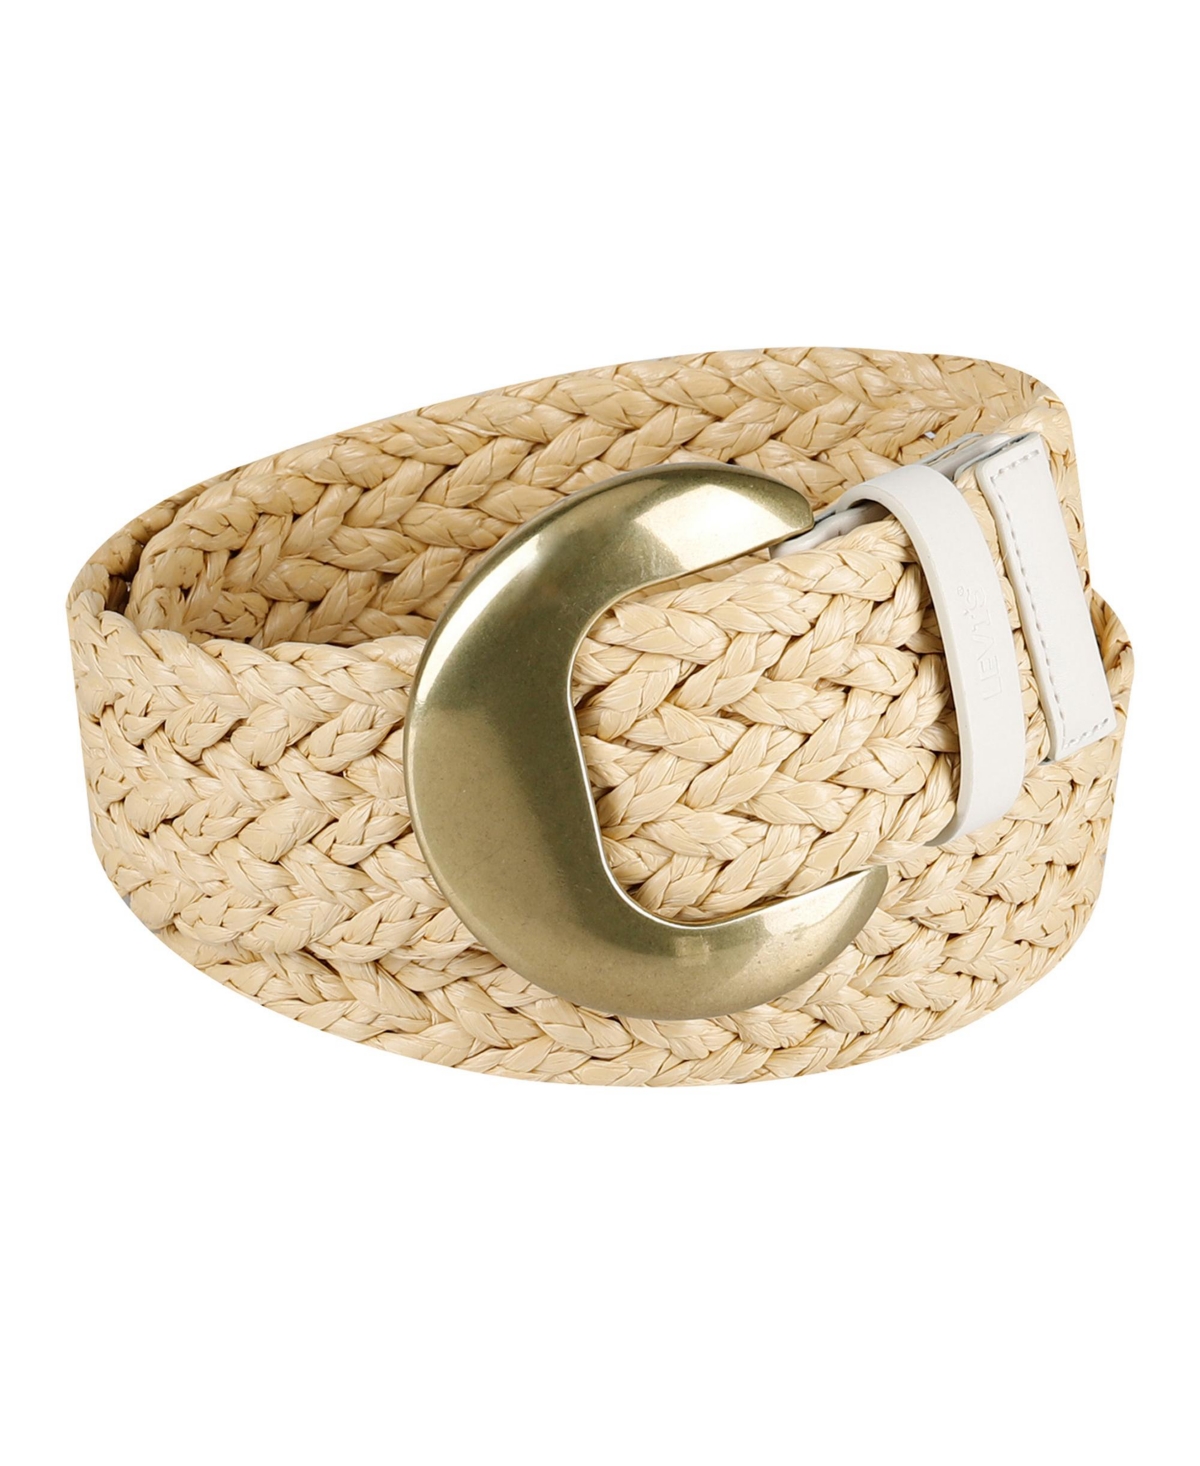 Levi's Women's Fully Adjustable Raffia Belt With Statement Buckle In Natural